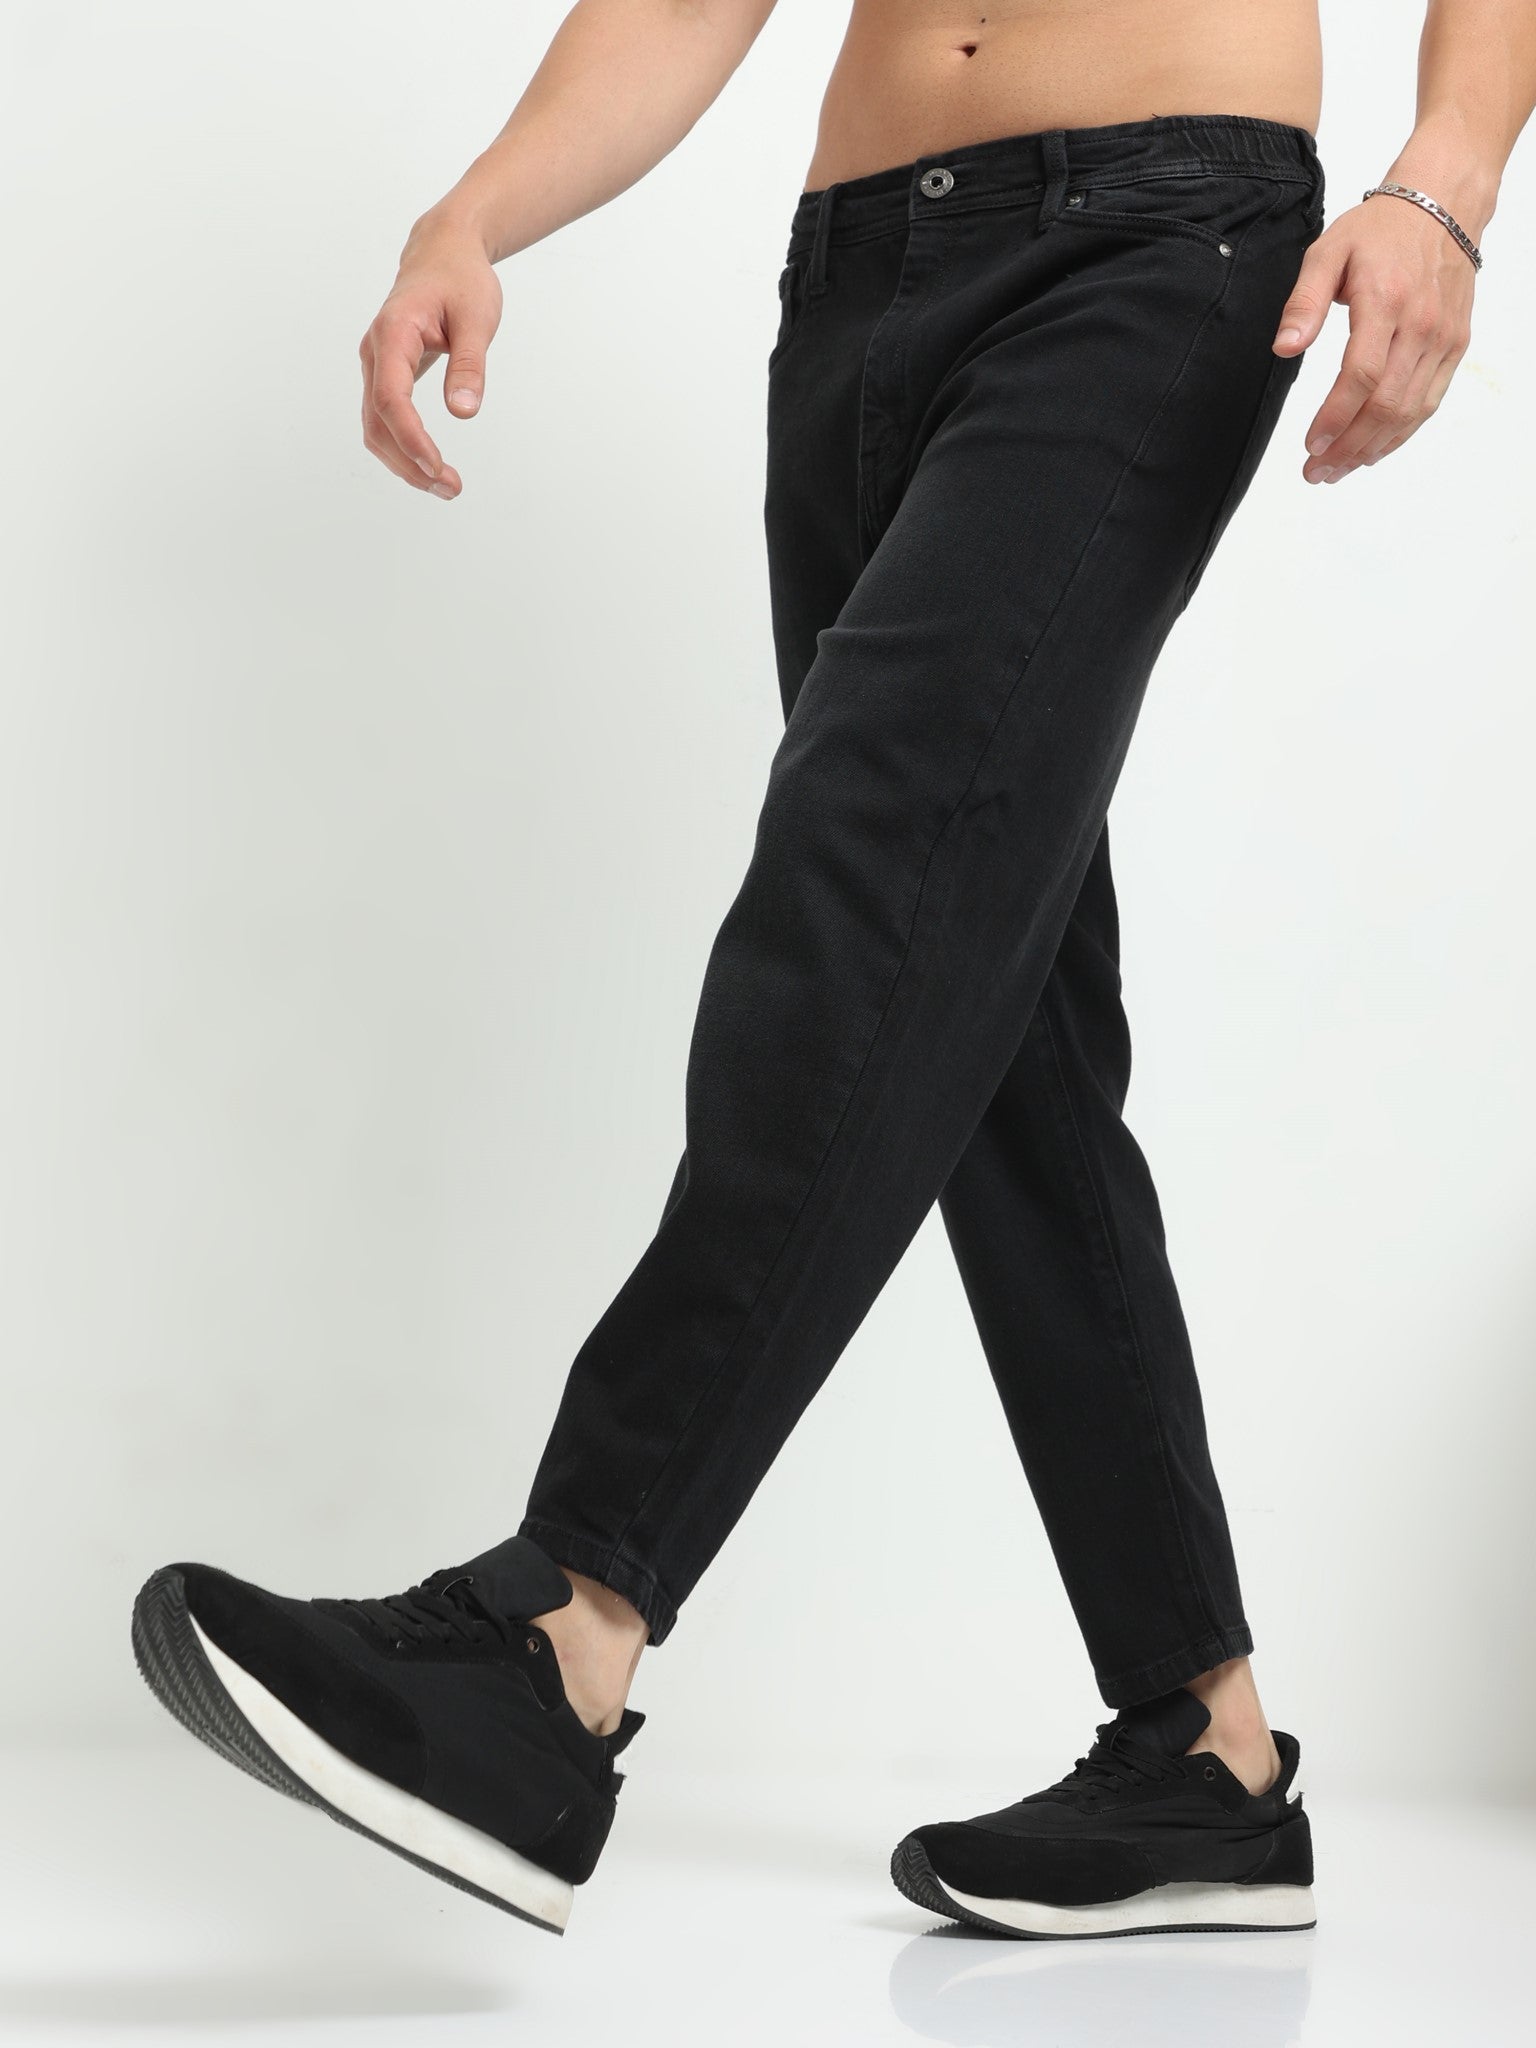 Jetblack Slouchy Fit Jeans for Men 